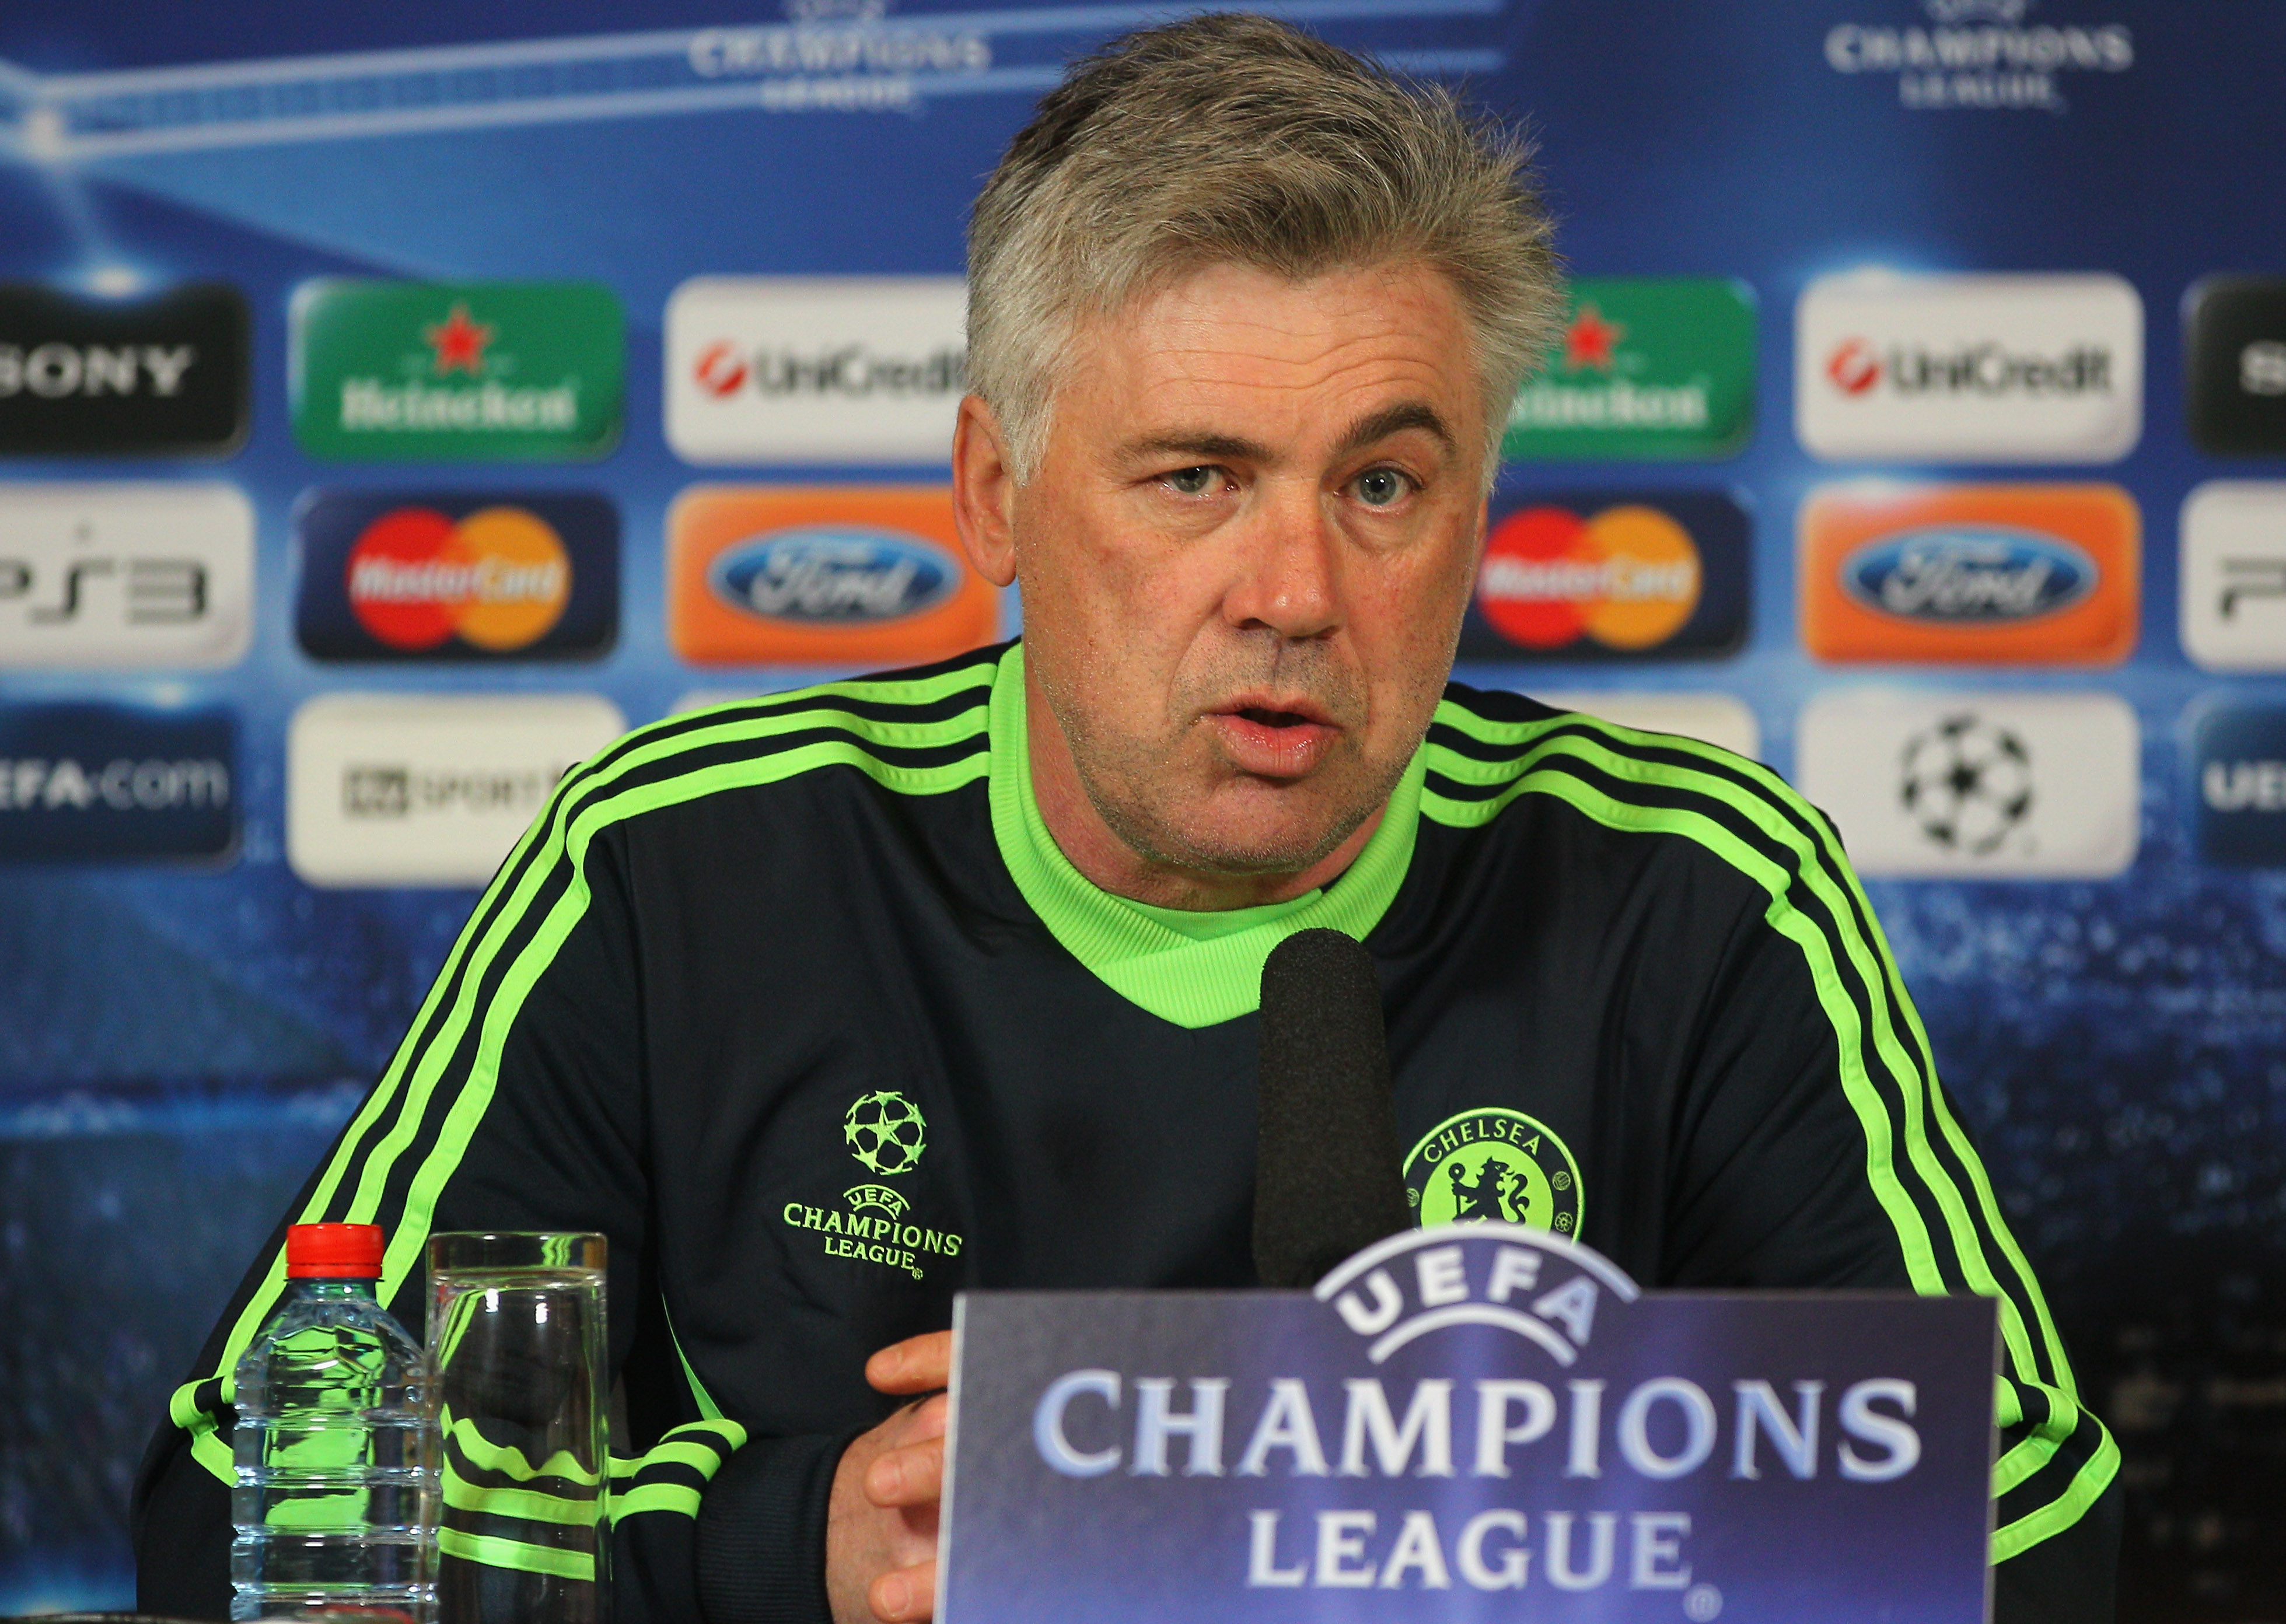 COBHAM, ENGLAND - MARCH 15:  Carlo Ancelotti of Chelsea talks to the media during a press conference prior to the UEFA Champions League round of 16 second leg match between Chelsea and FC Copenhagen on March 15, 2011 in Cobham, England.  (Photo by Clive R